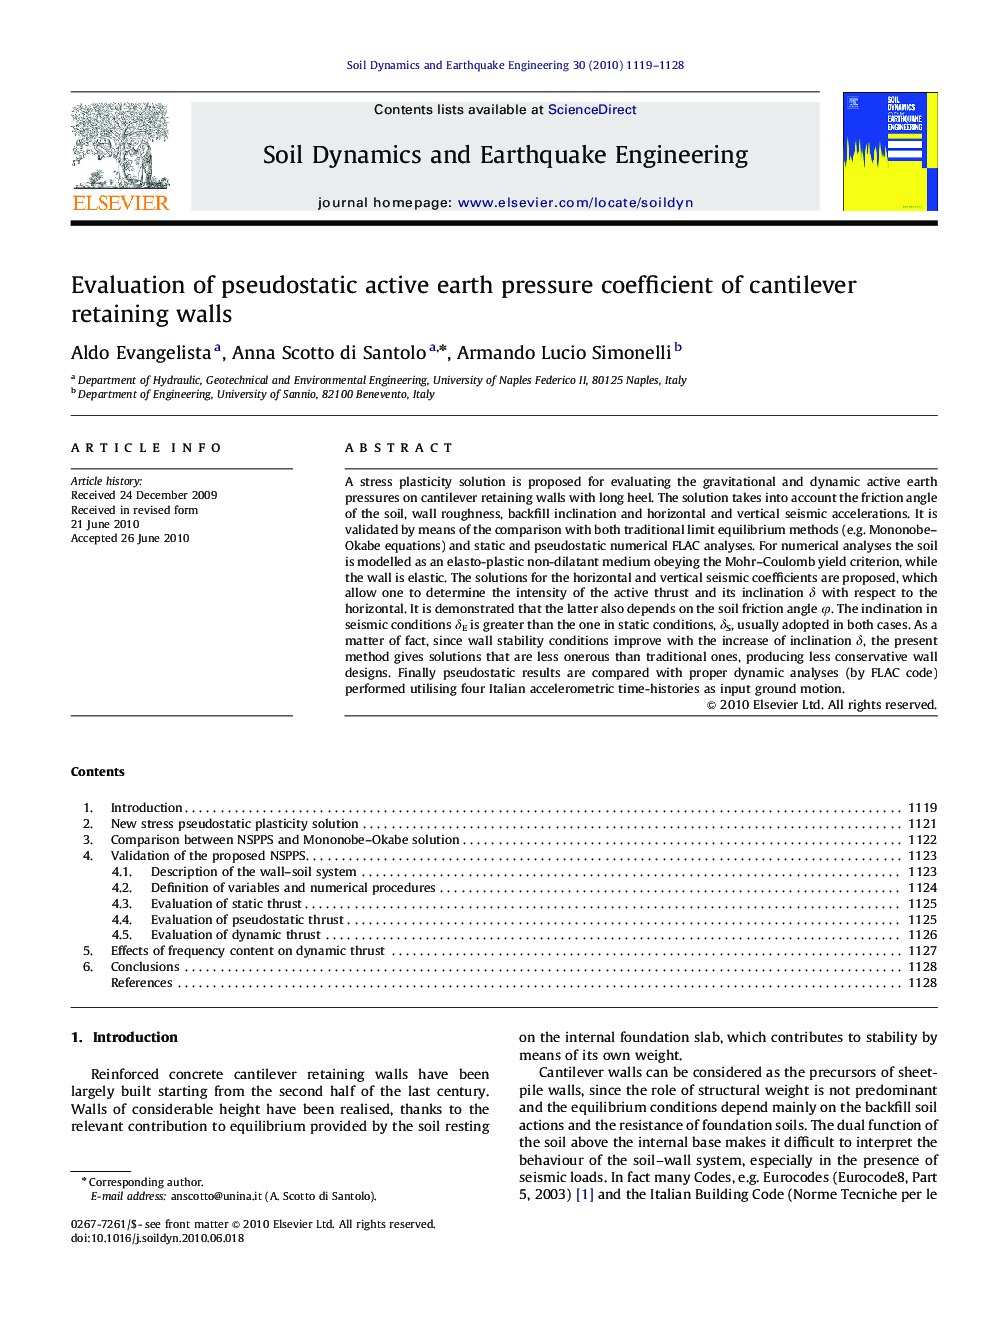 Evaluation of pseudostatic active earth pressure coefficient of cantilever retaining walls